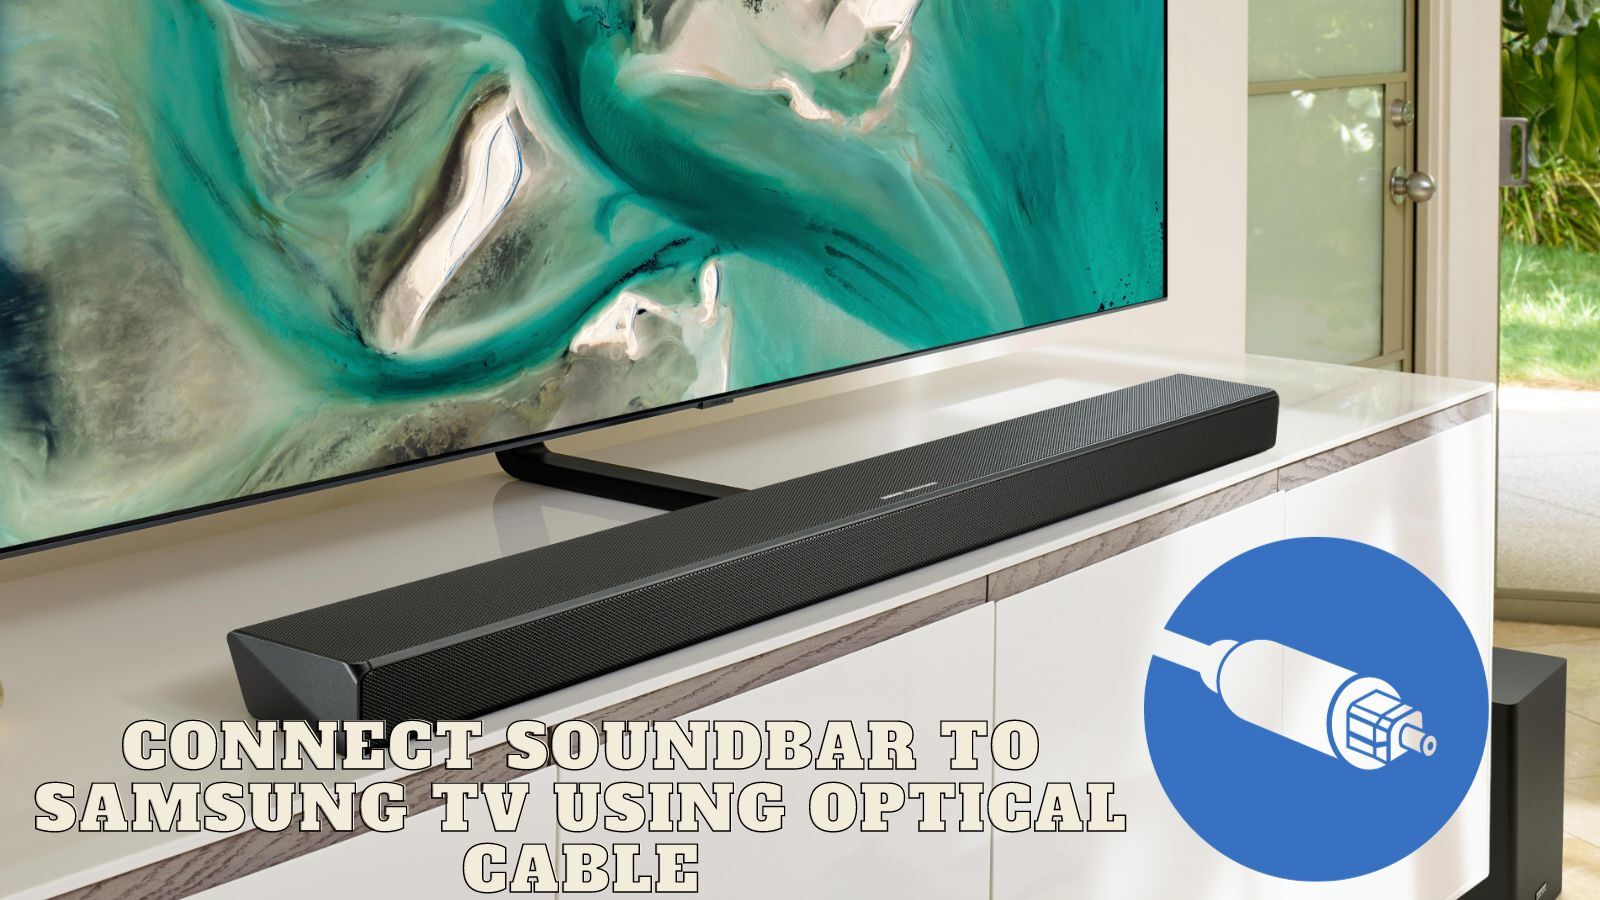 How to Connect Soundbar to Samsung TV Using Optical Cable?